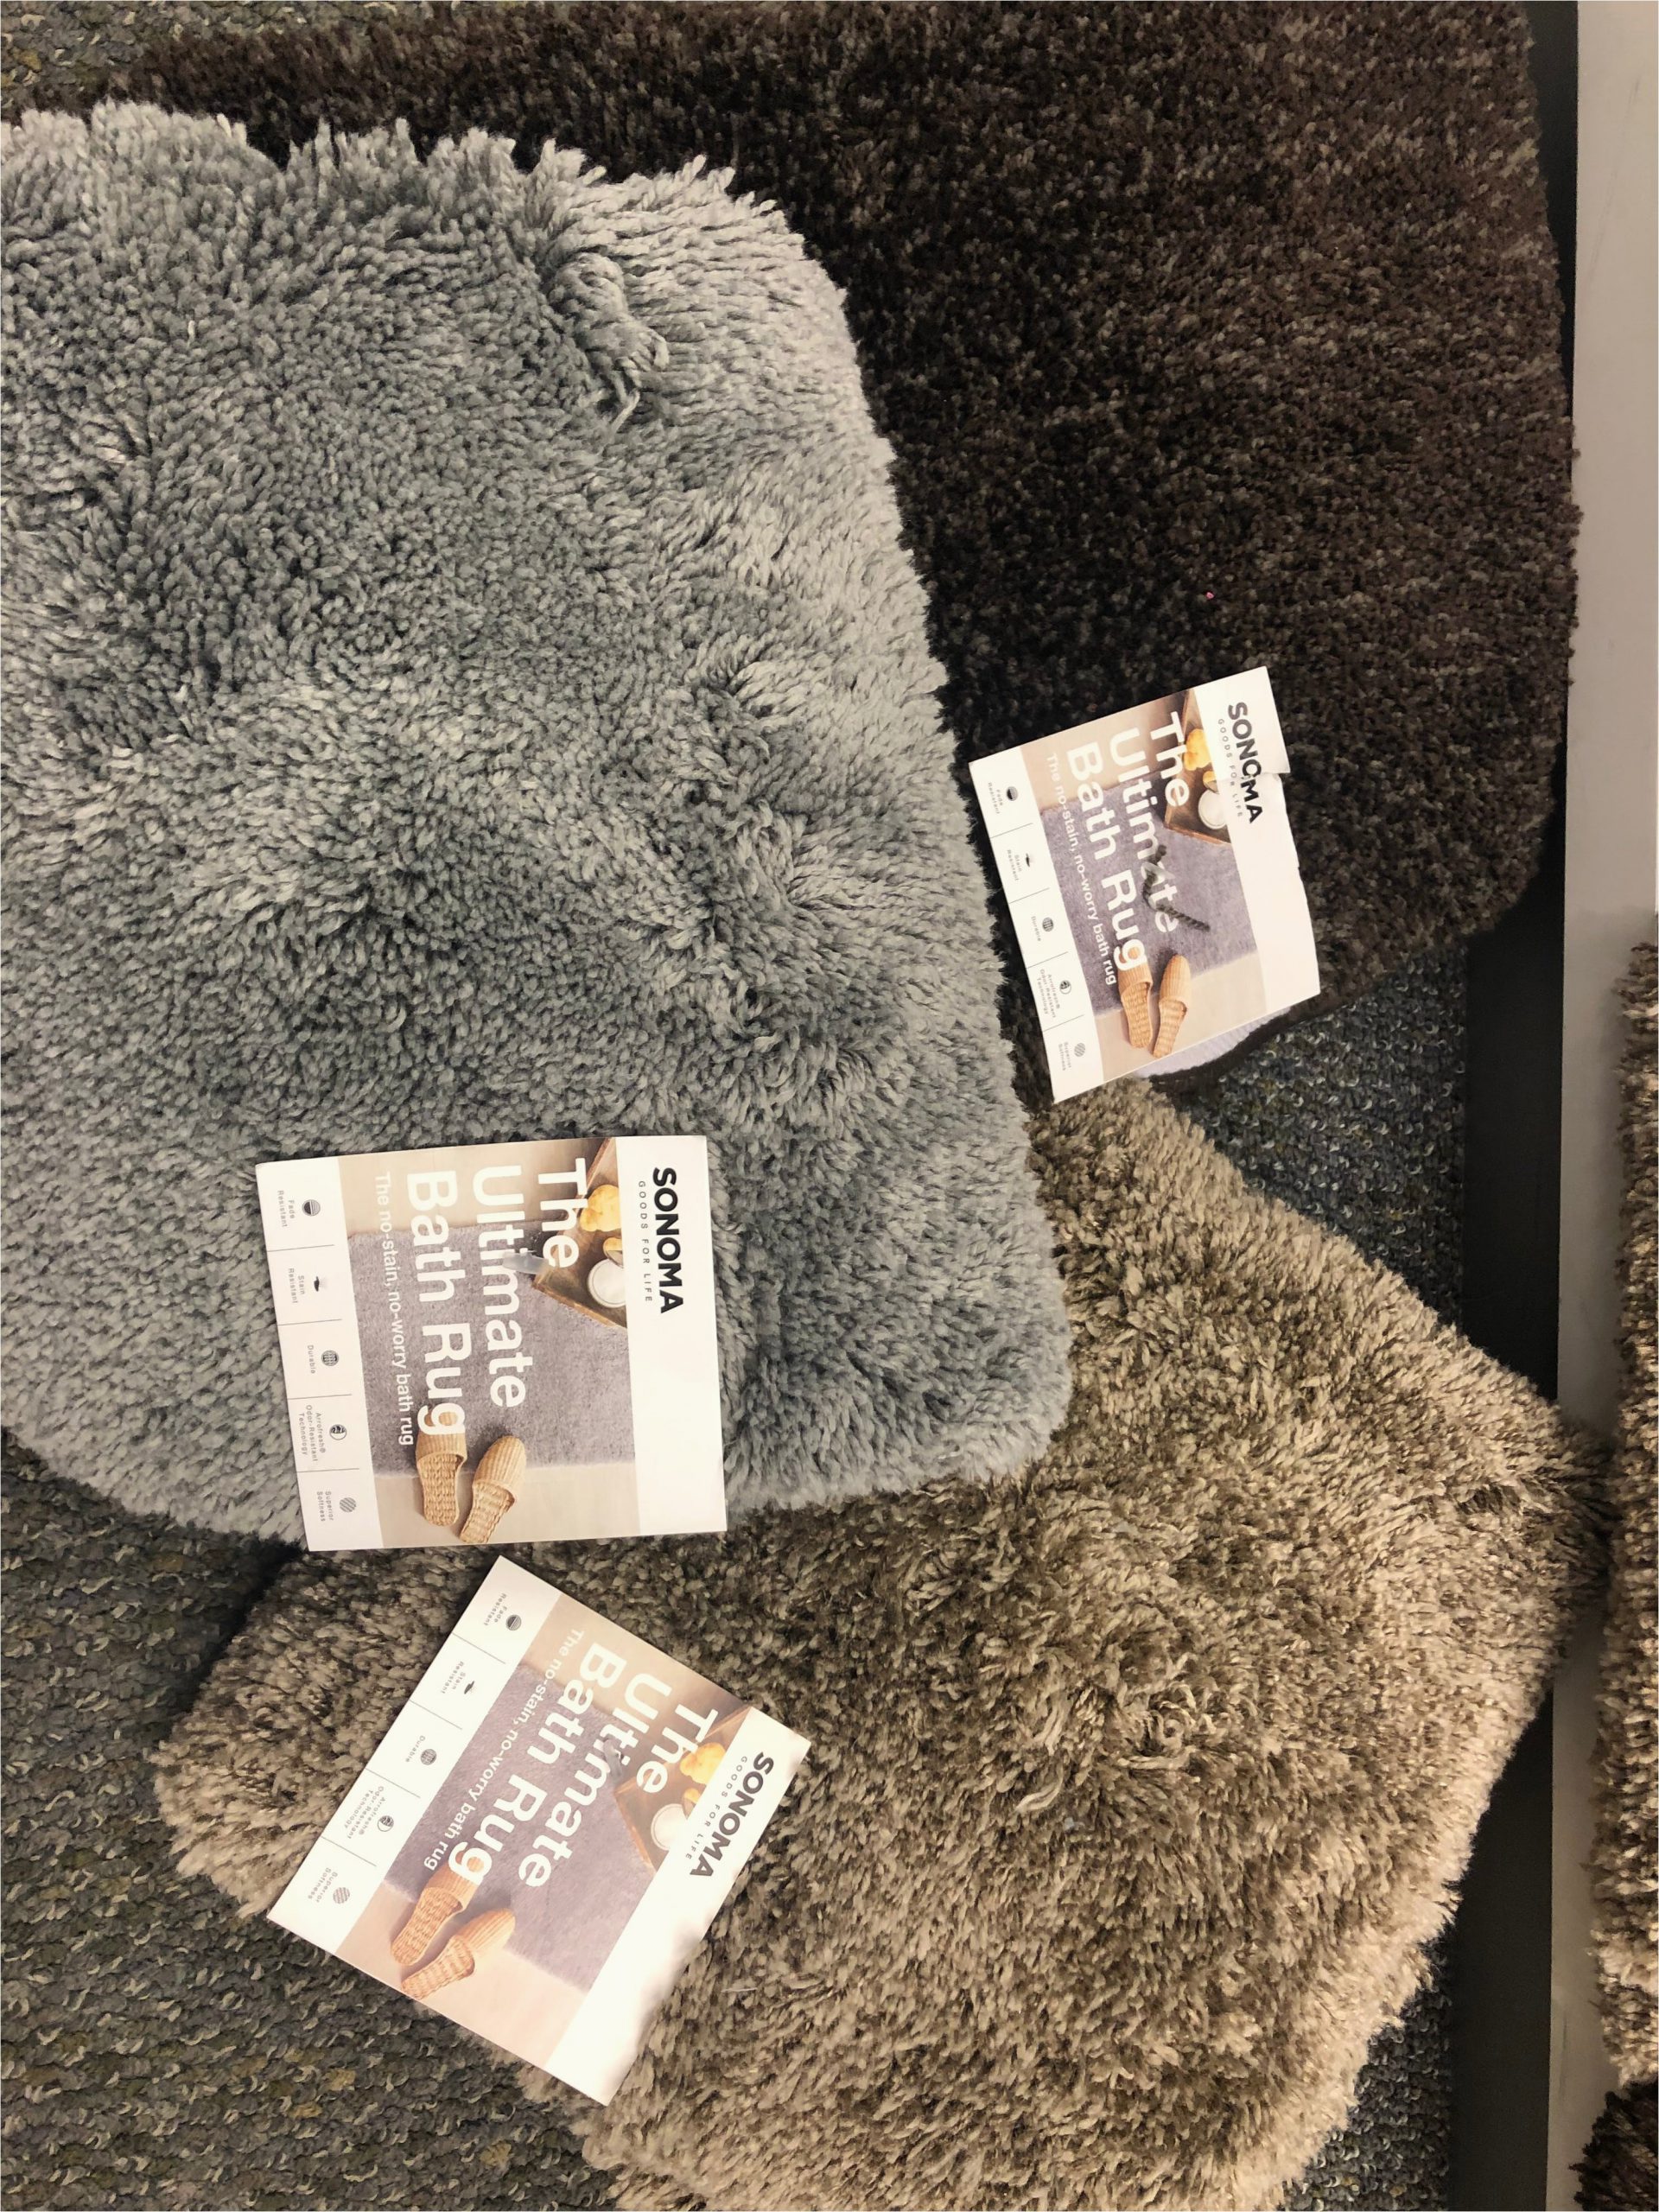 Walmart Bathroom Rugs Sale $8 sonoma Ultimate Bath Rugs at Kohl S the Krazy Coupon Lady